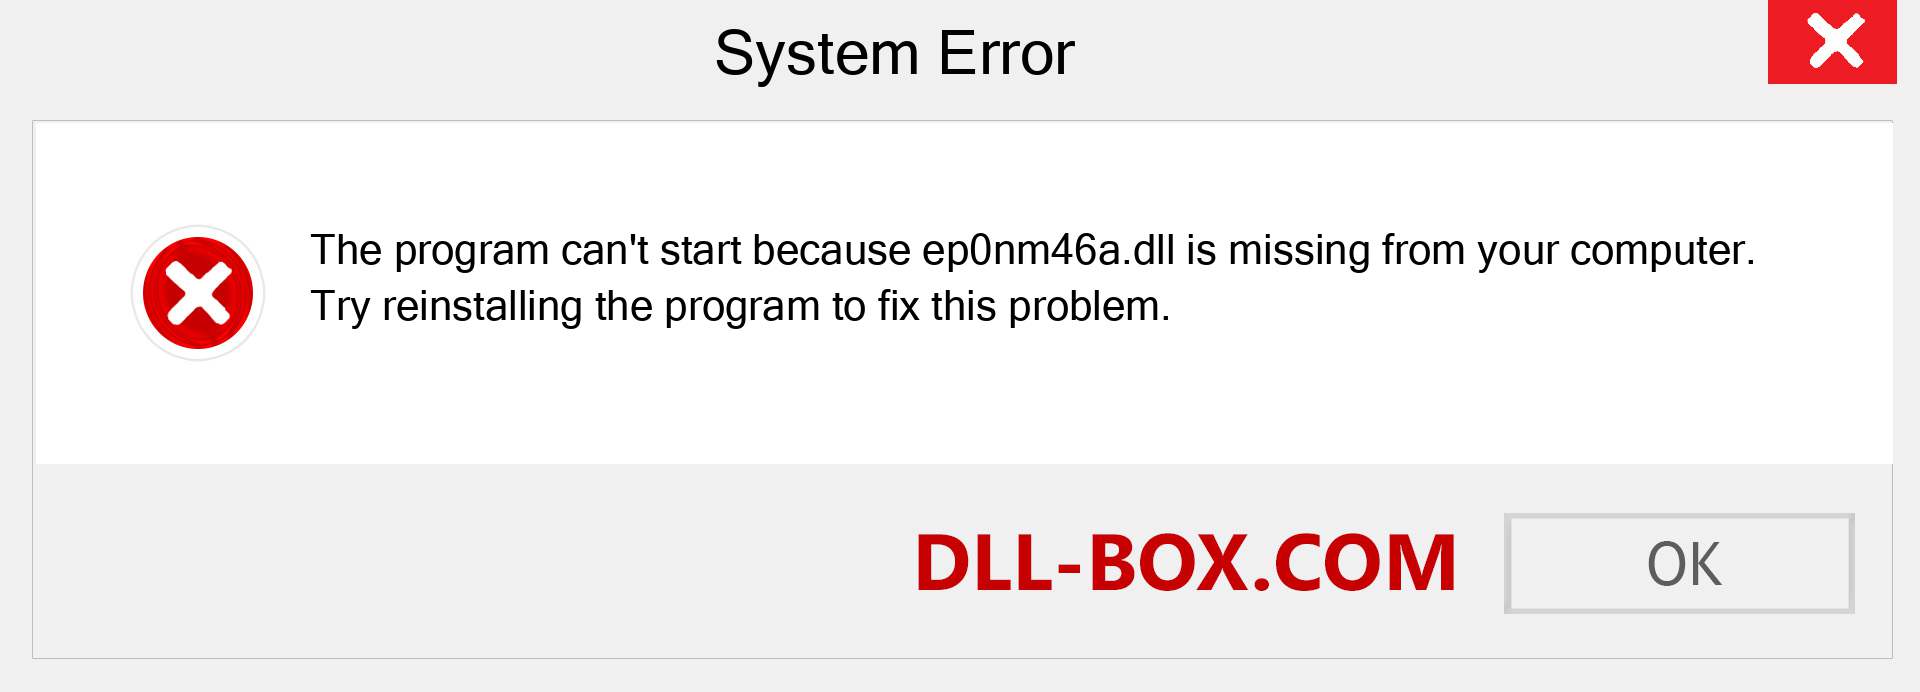  ep0nm46a.dll file is missing?. Download for Windows 7, 8, 10 - Fix  ep0nm46a dll Missing Error on Windows, photos, images